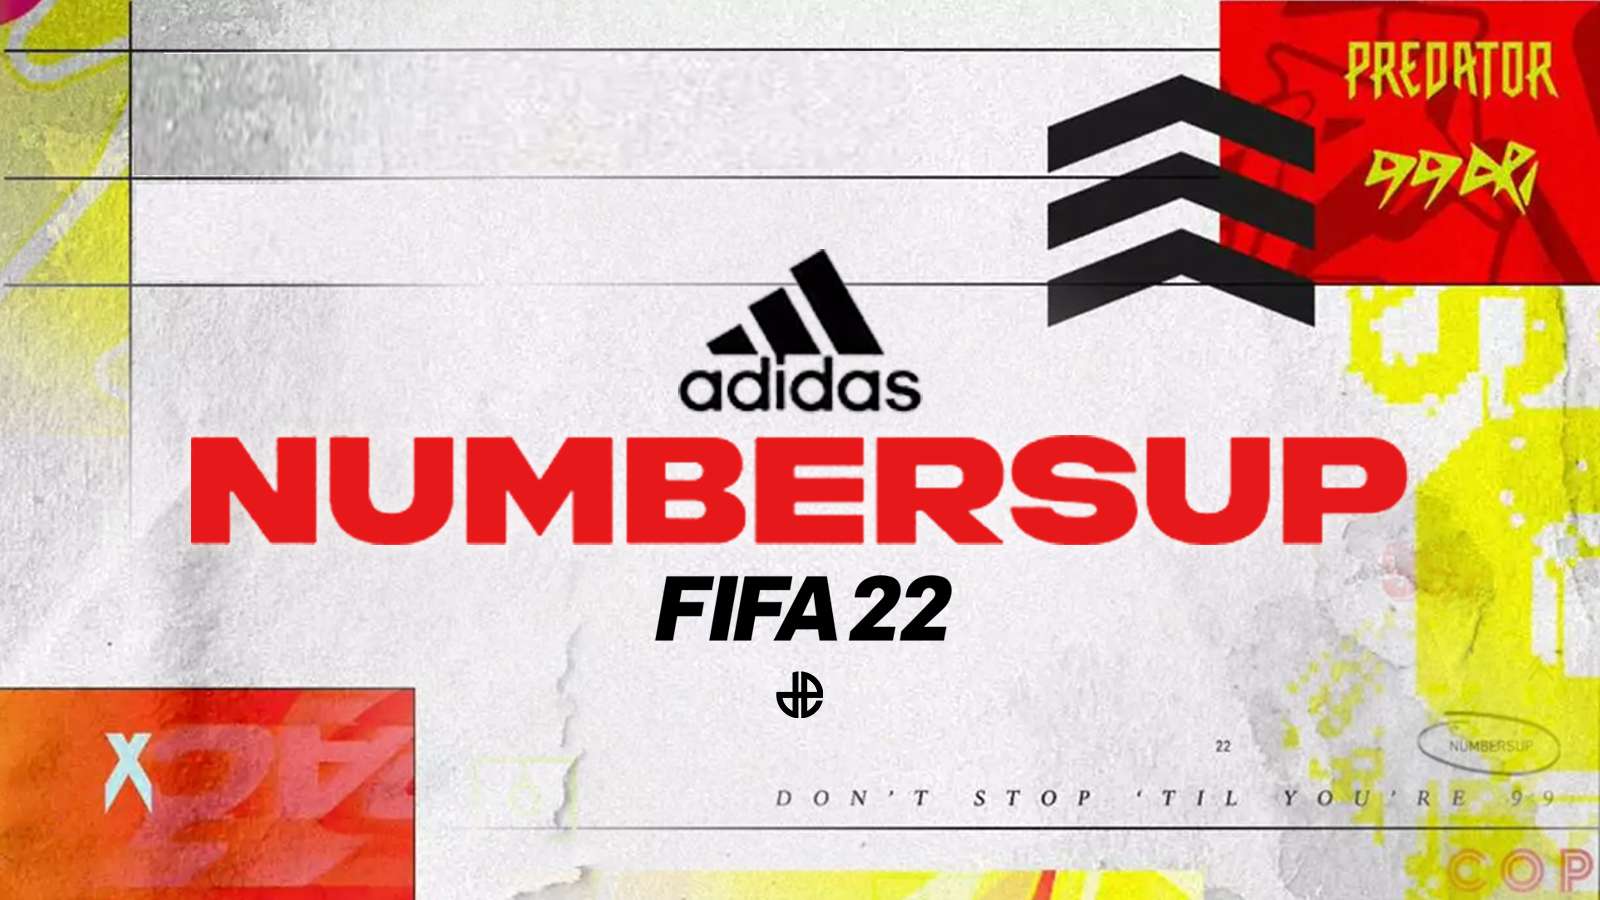 FIFA 22 Numbers Up Adidas 99 promo loading screen.